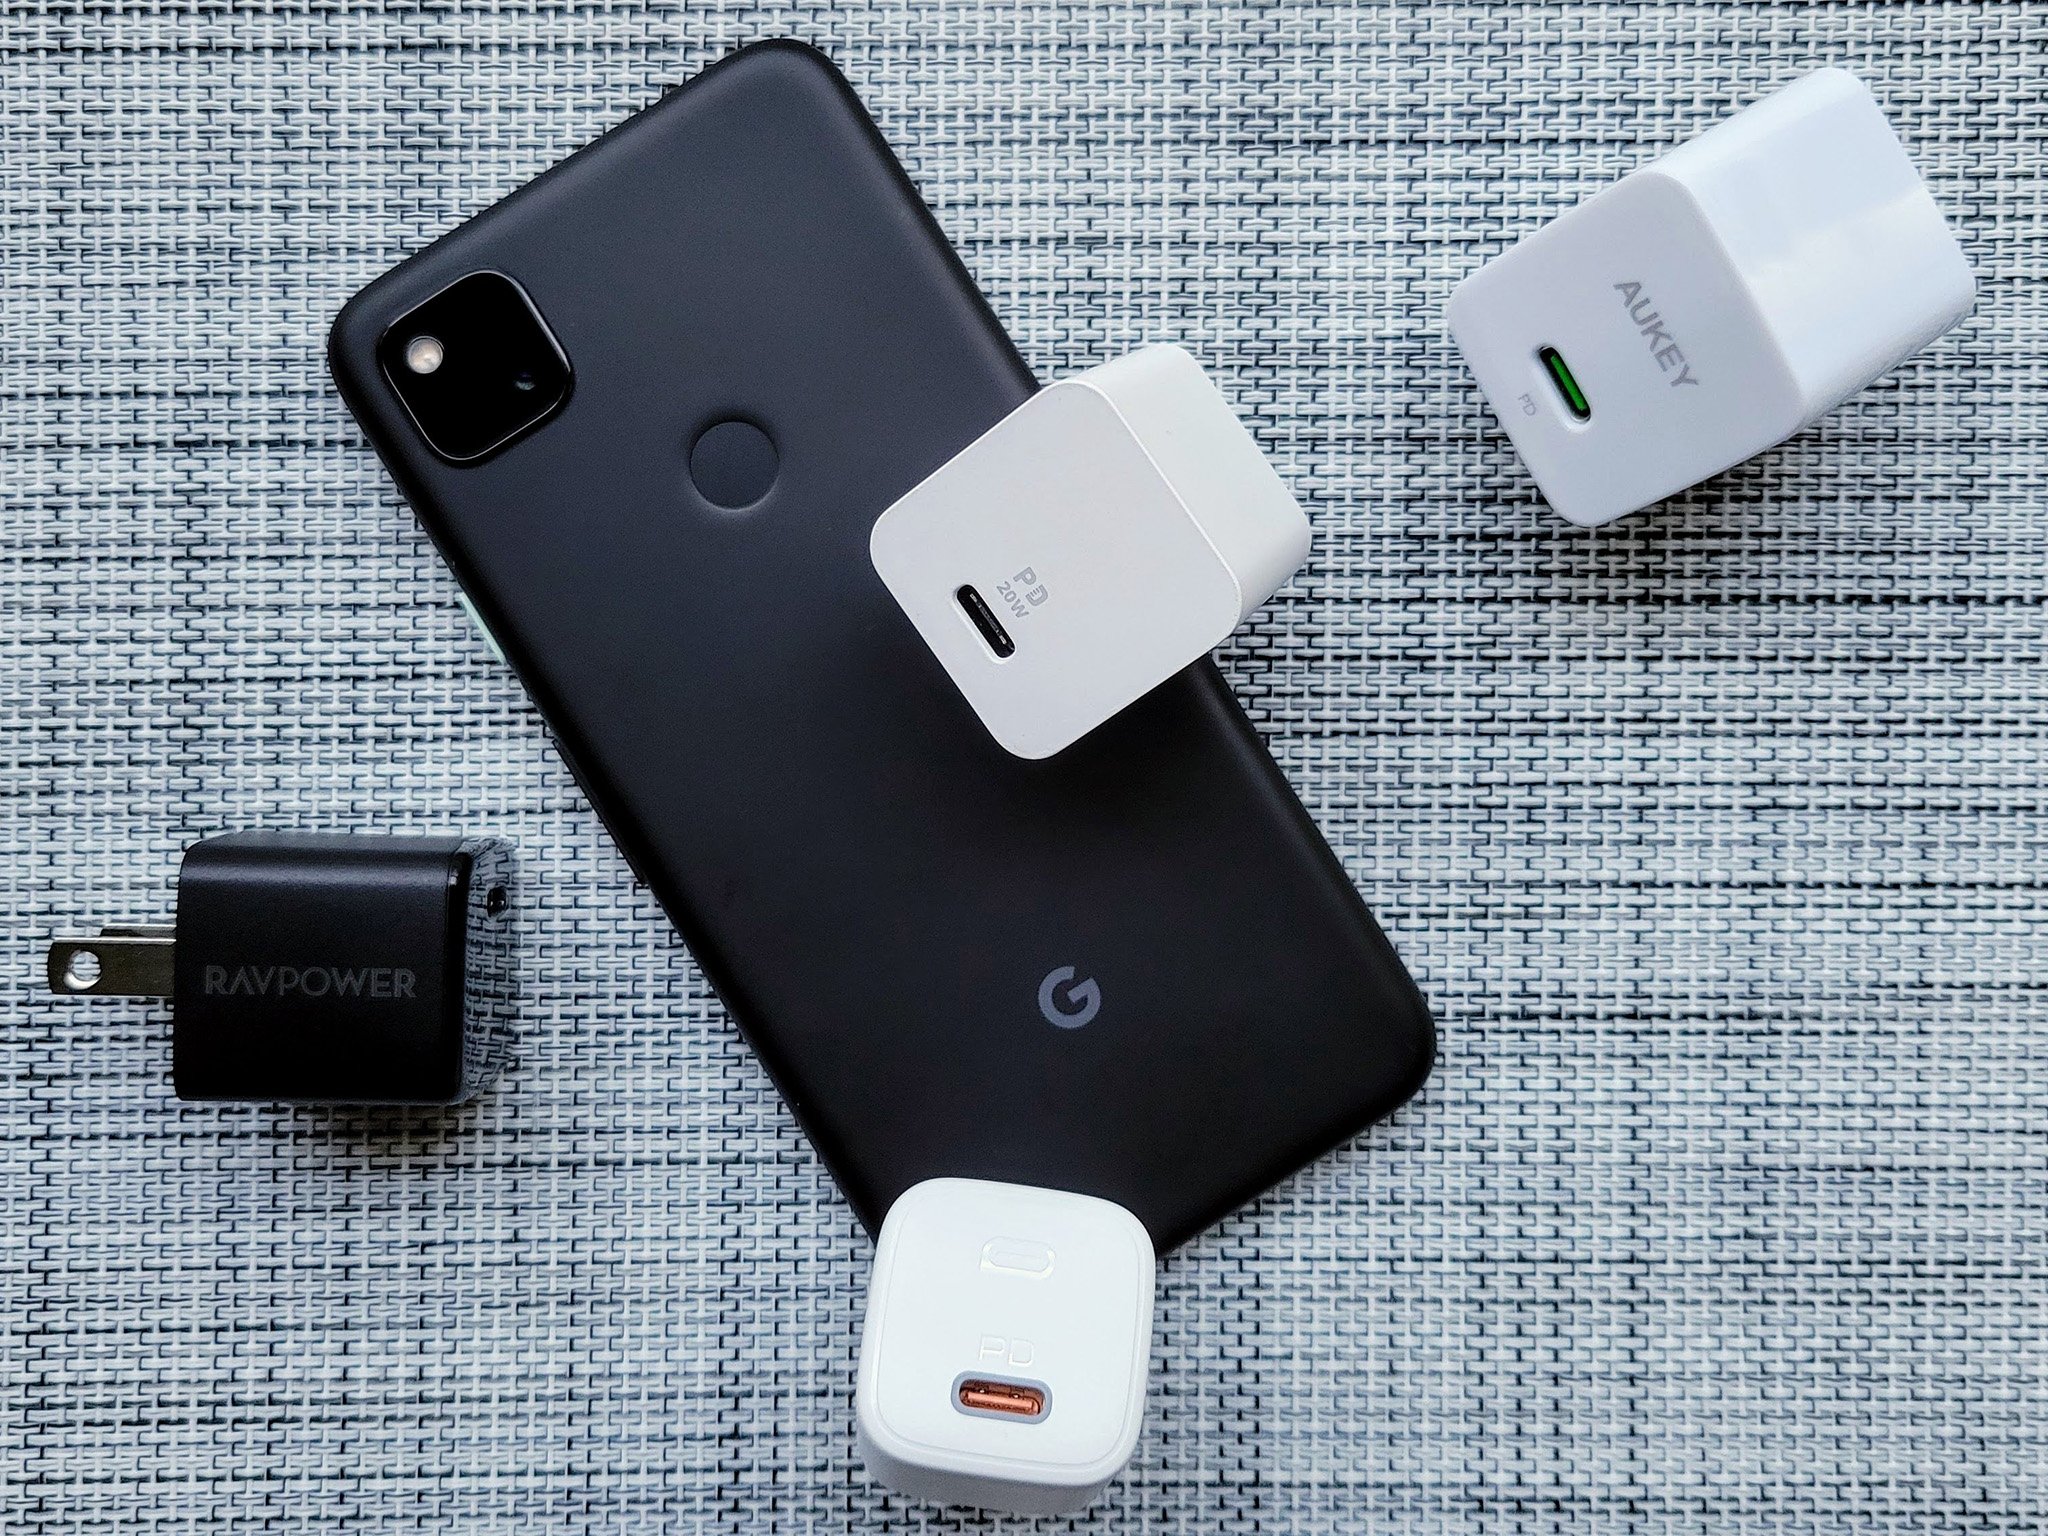 Poll: Does it matter if your smartphone doesn't come with a charger in the box?